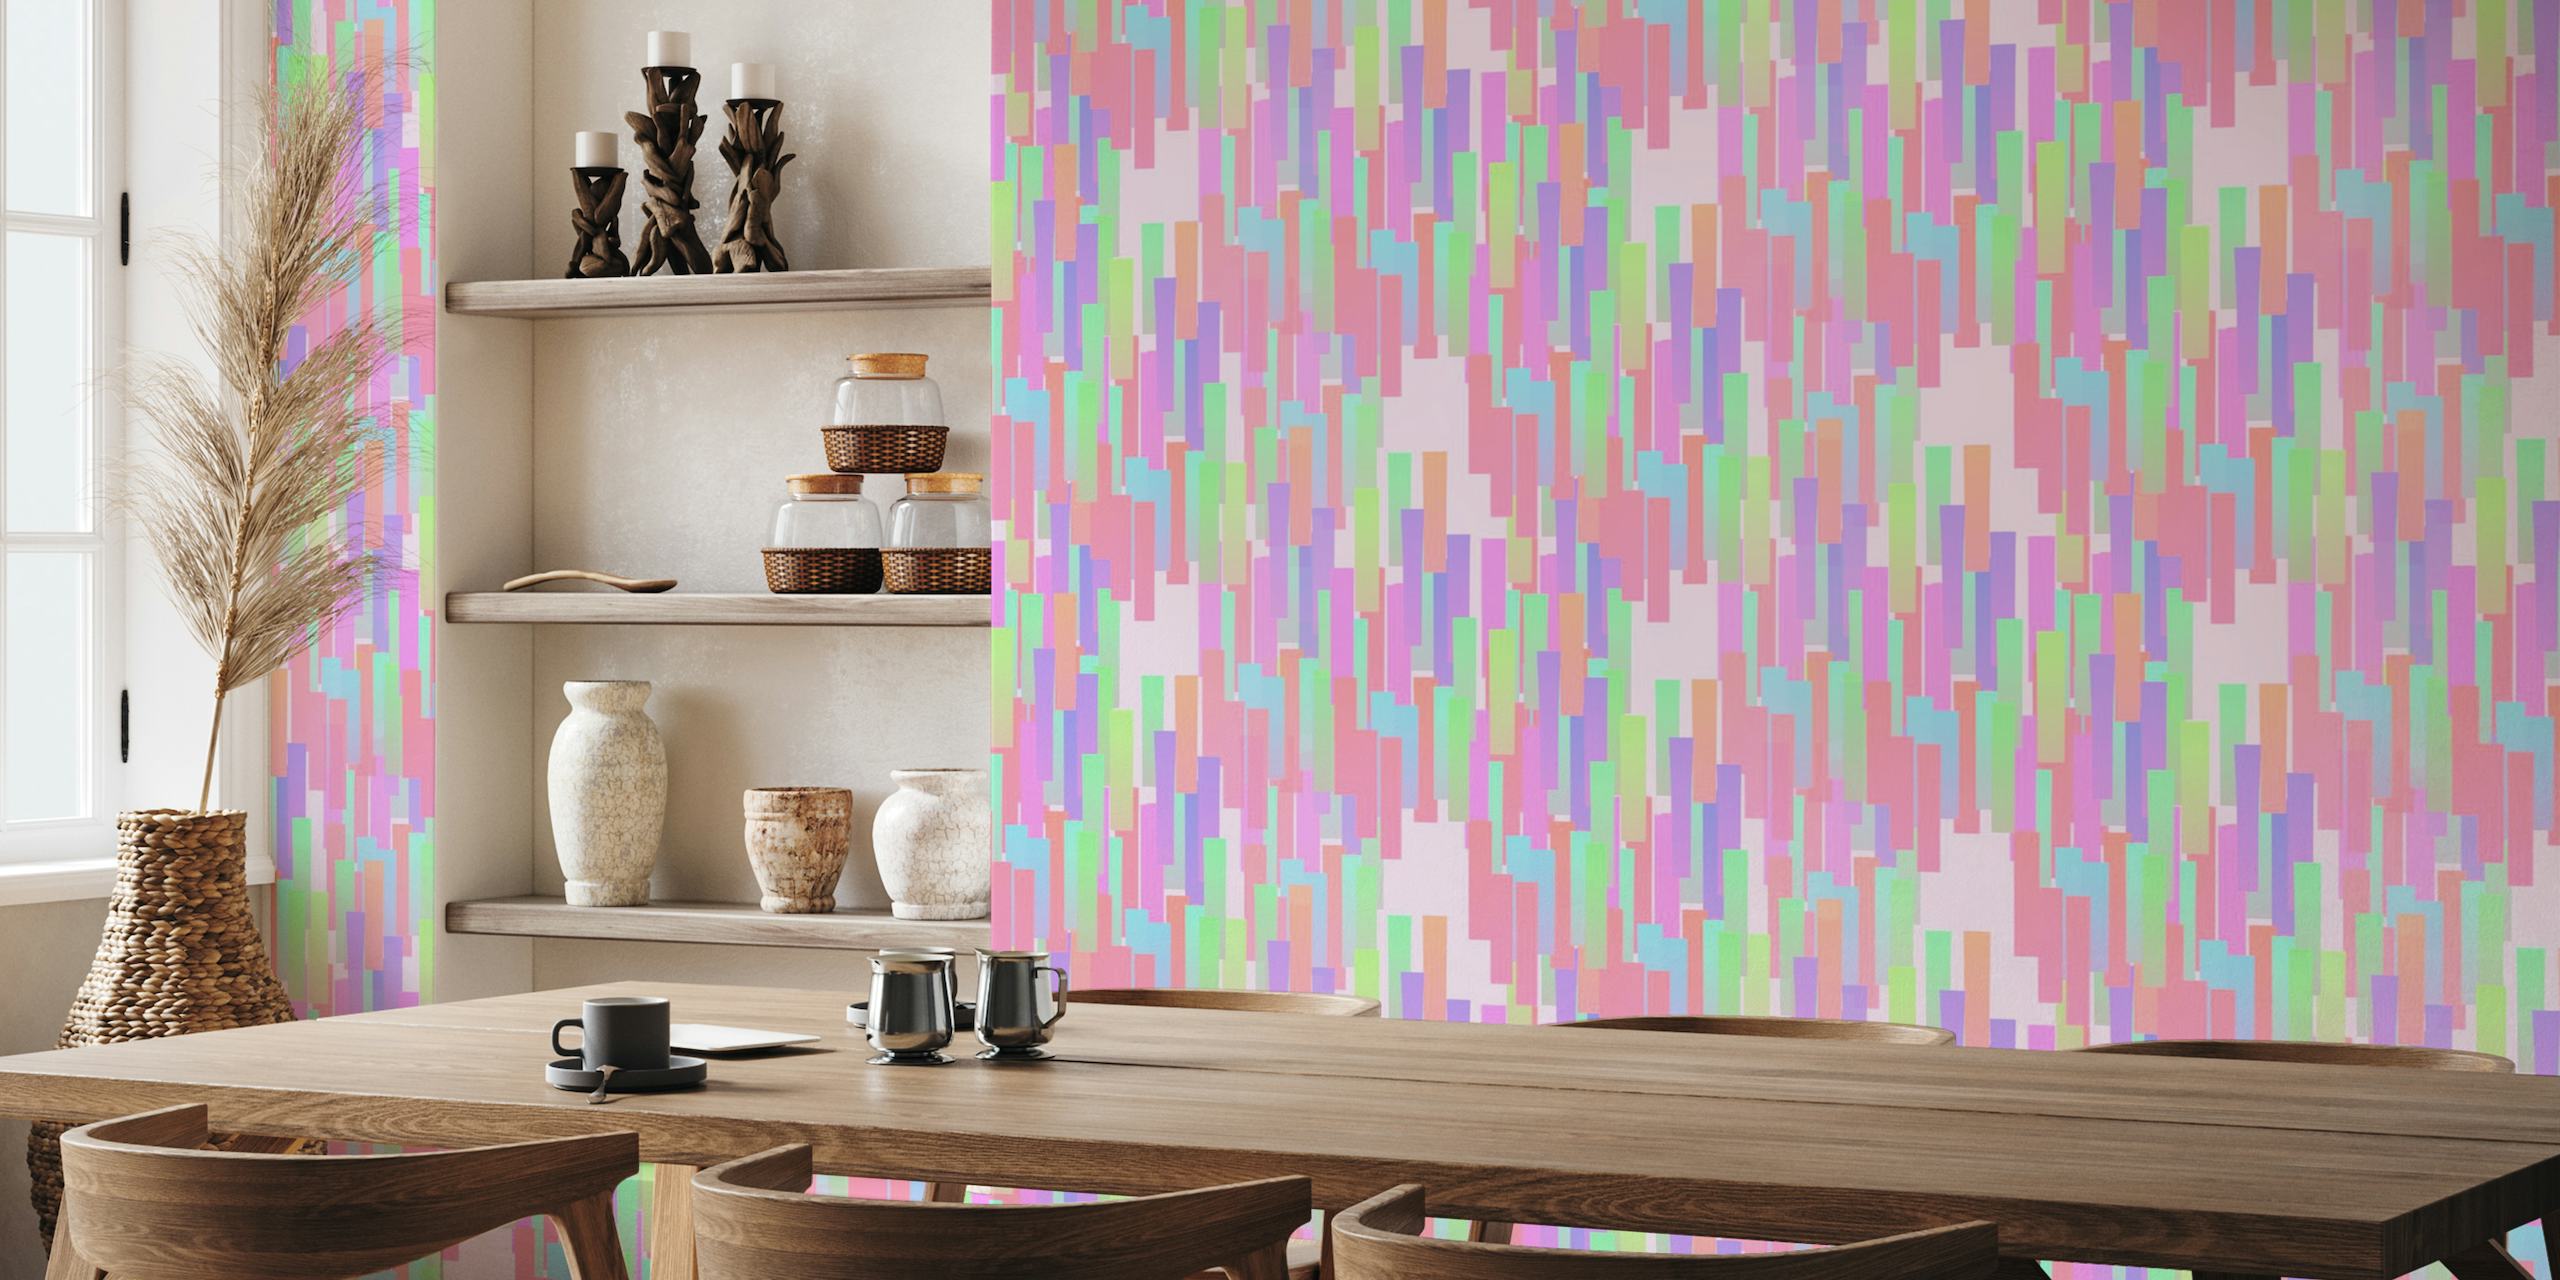 Abstract rainbow-colored vertical drips wall mural